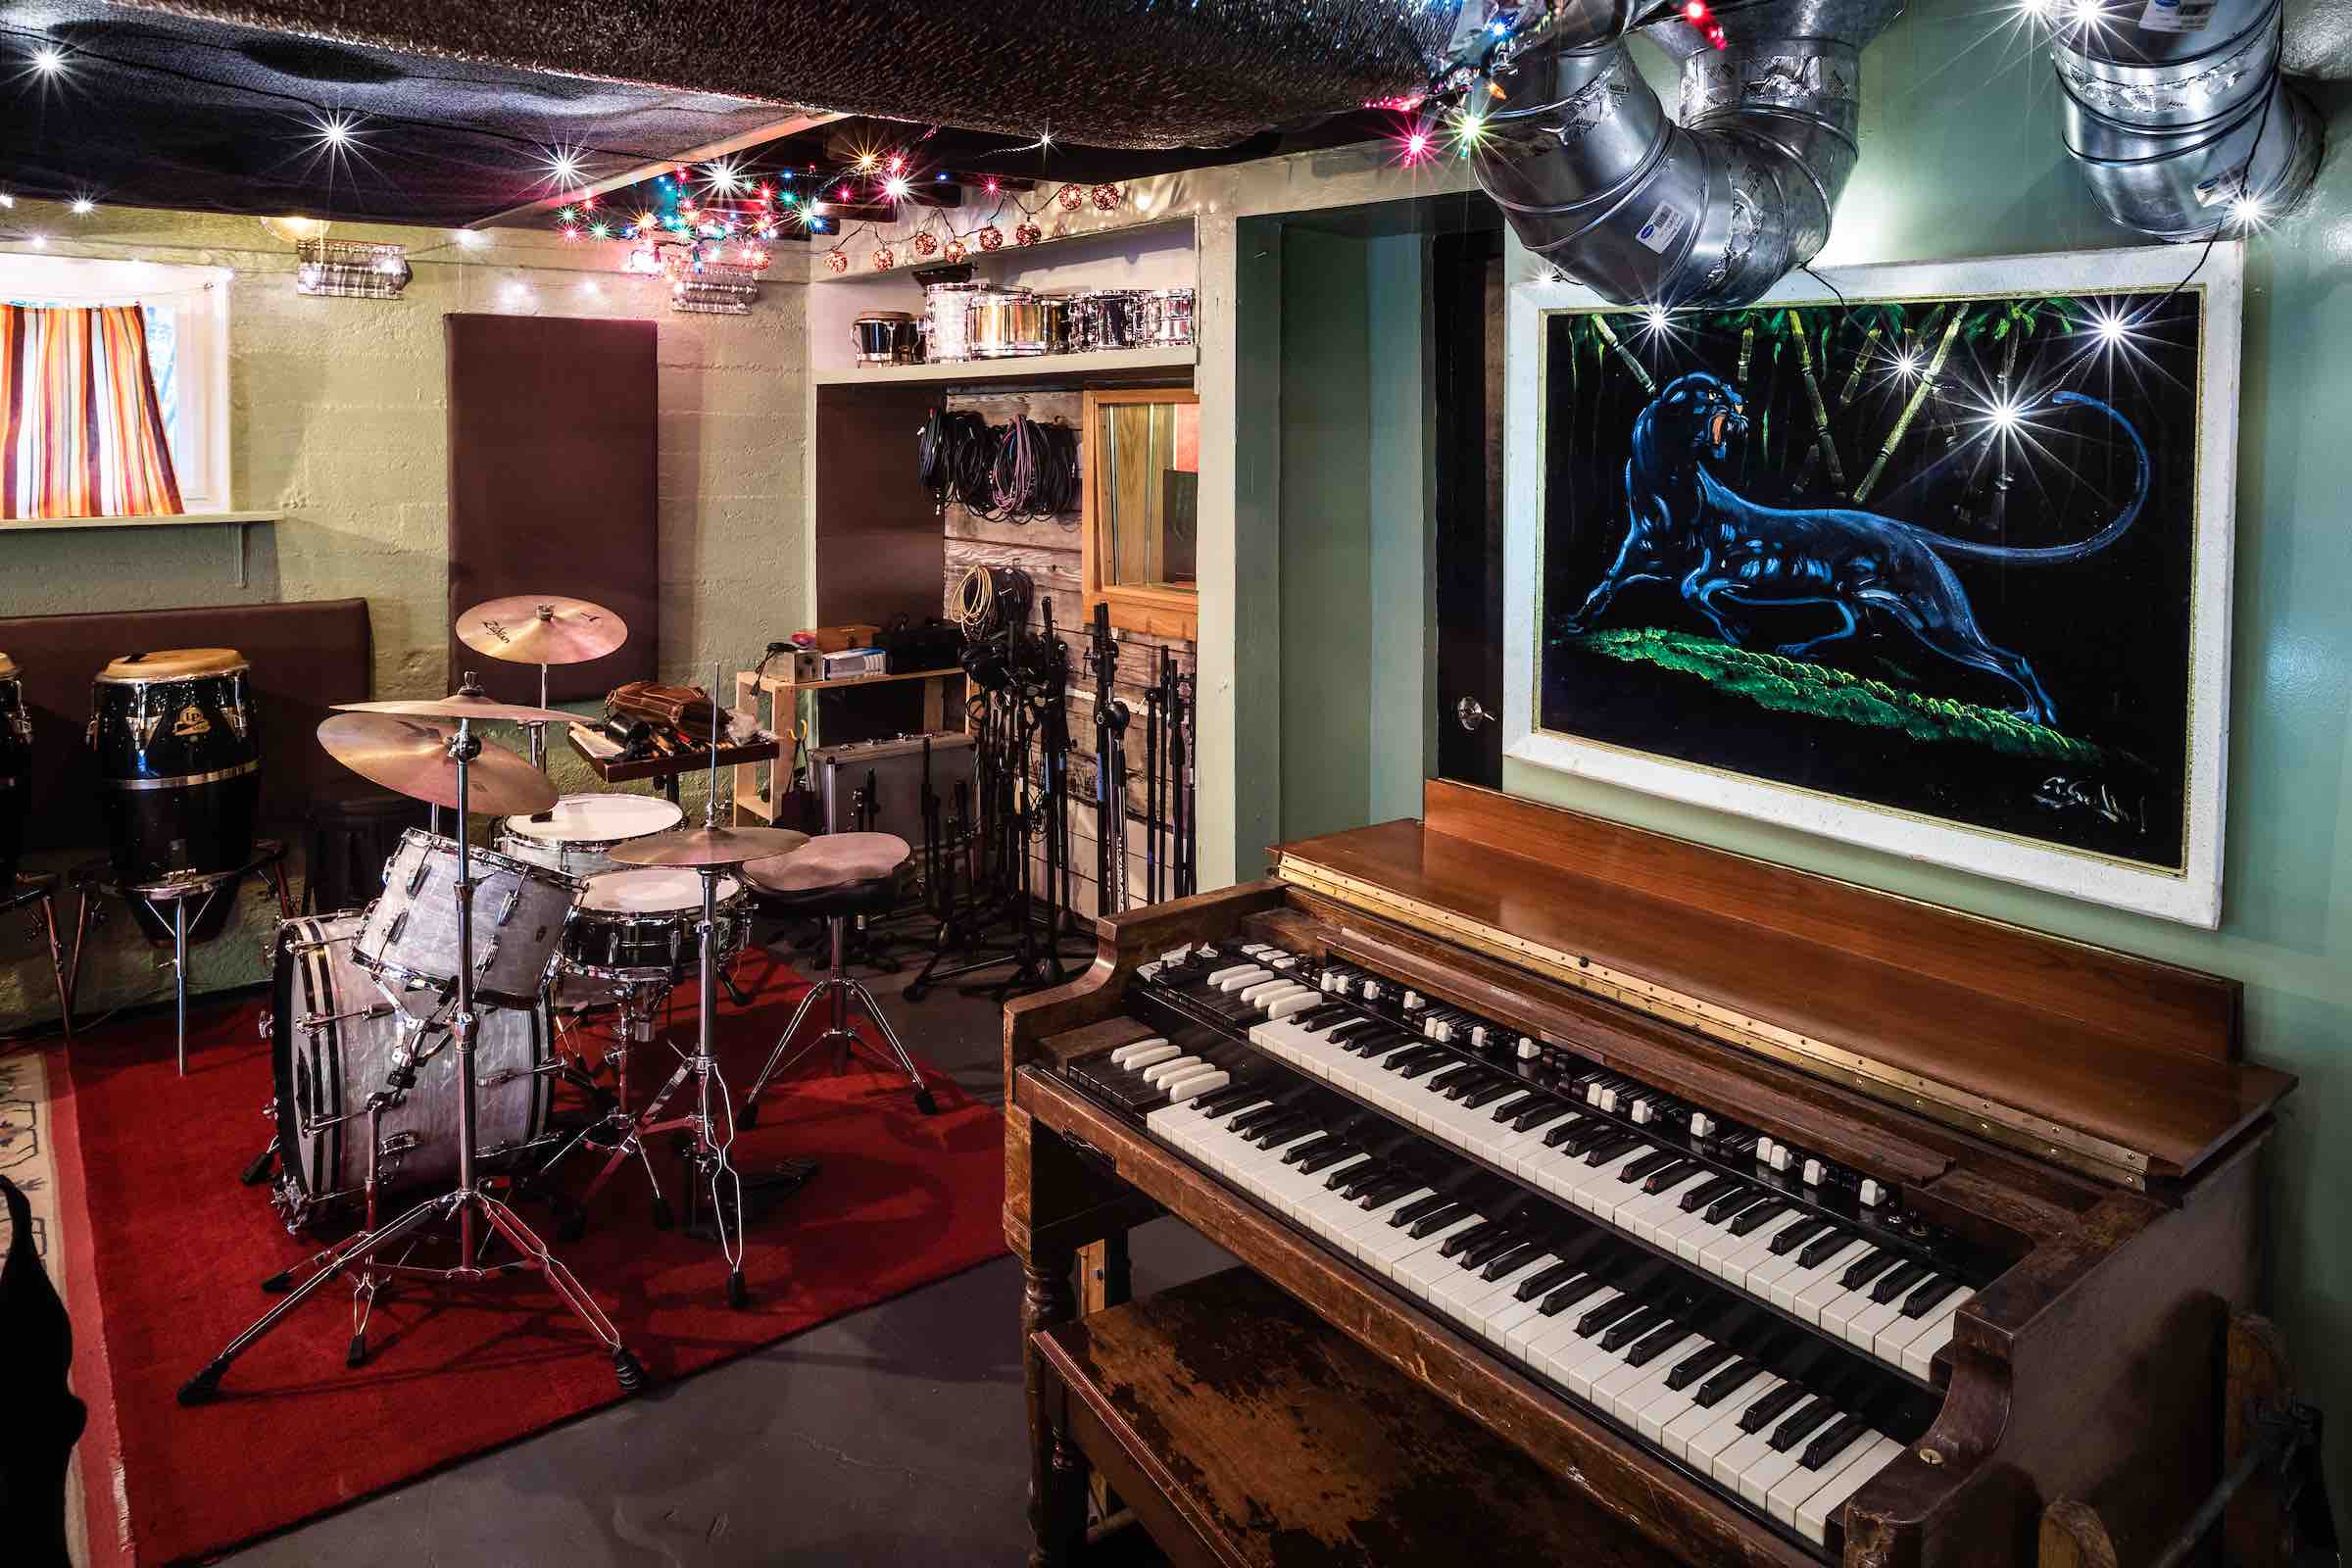 The Hammond organ at the Panther studio in Portland, OR.